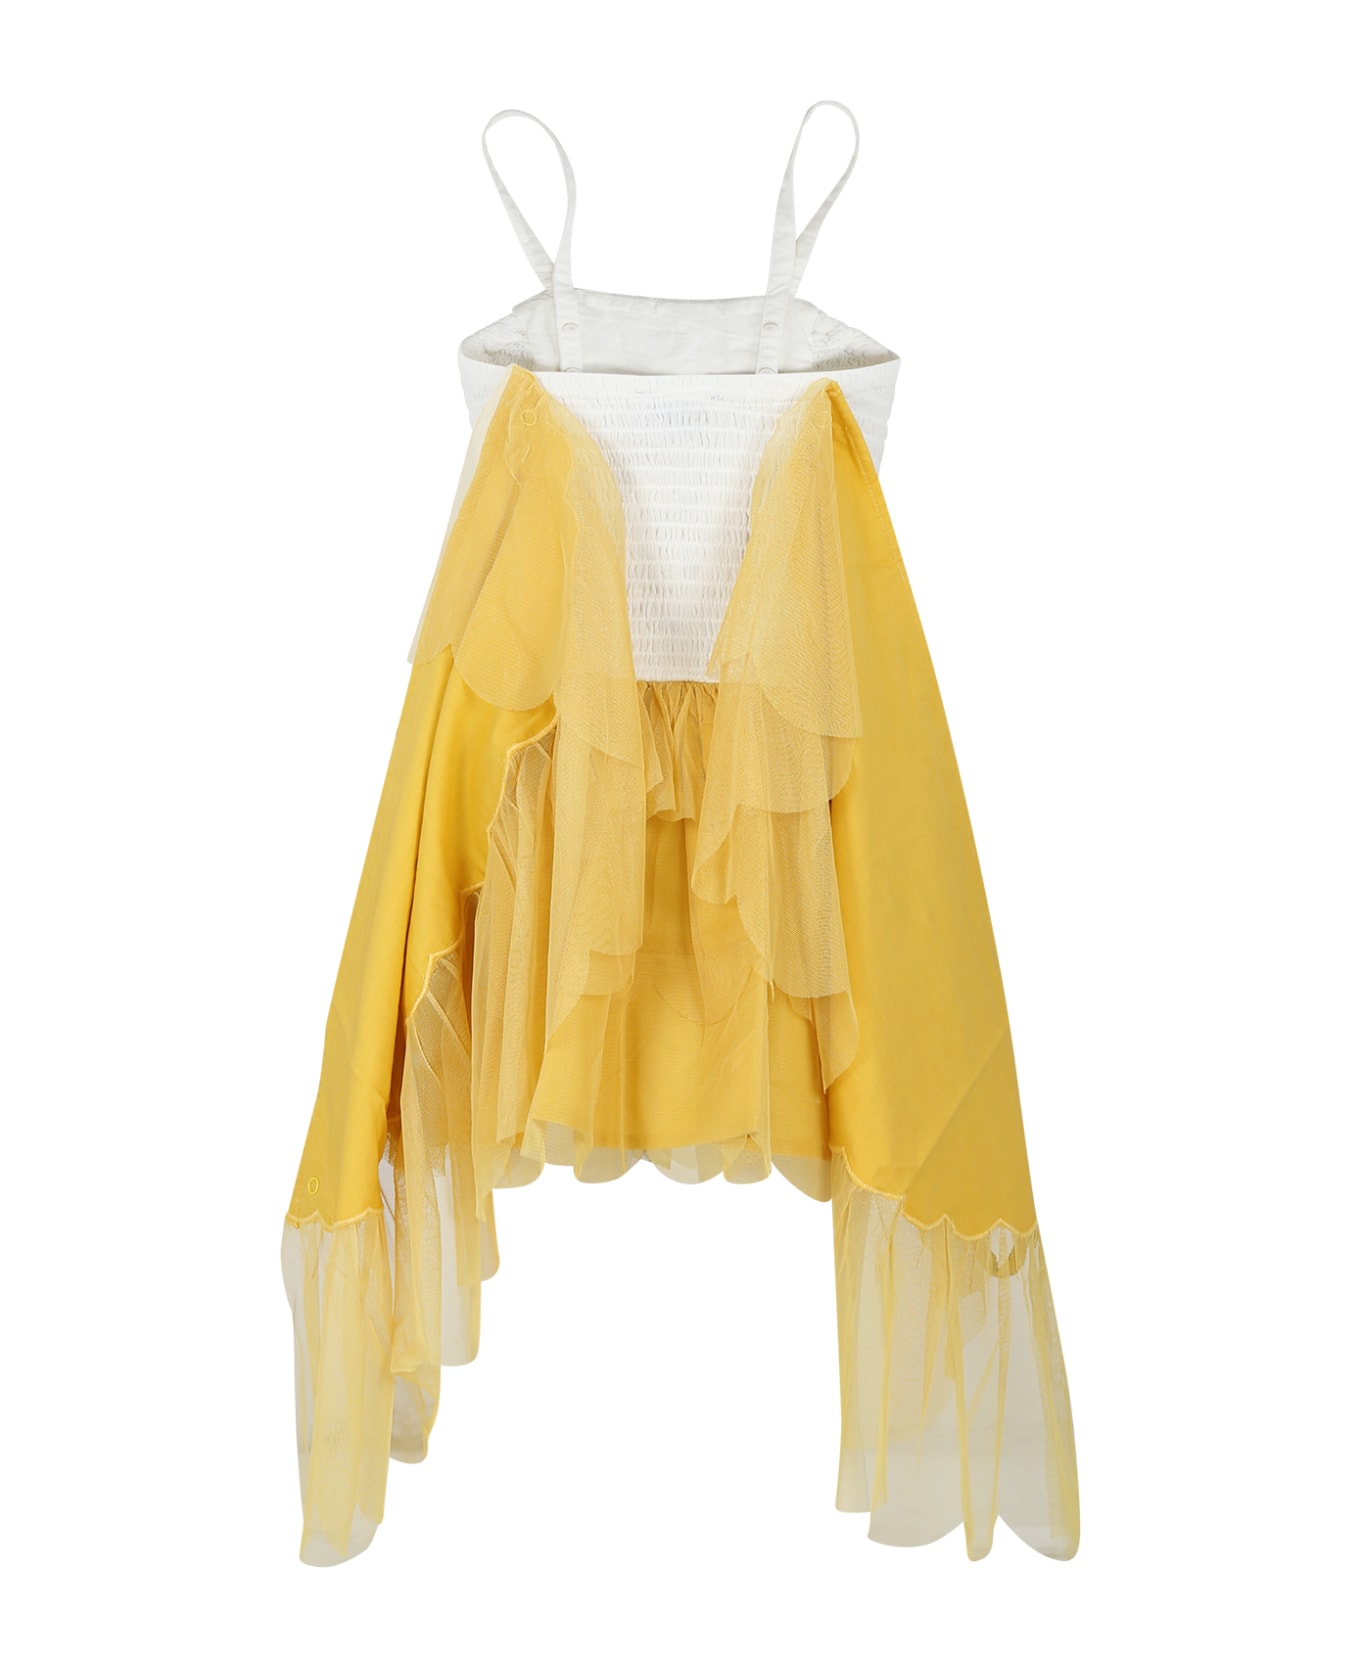 Stella McCartney Kids Yellow Dress For Girl With Bees - Yellow